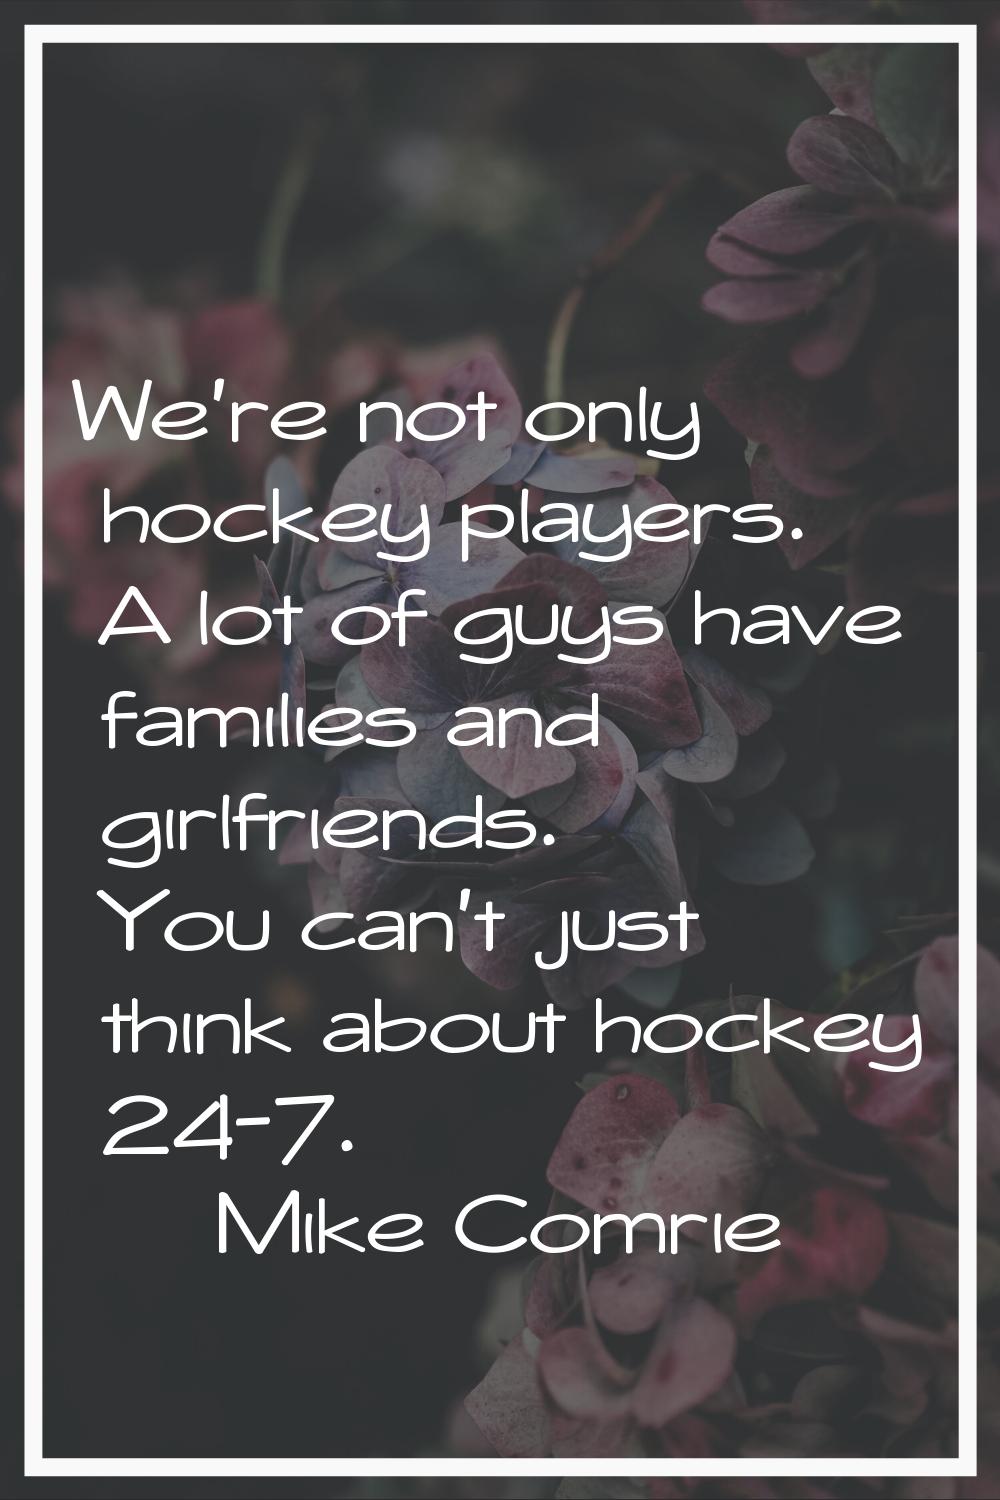 We're not only hockey players. A lot of guys have families and girlfriends. You can't just think ab